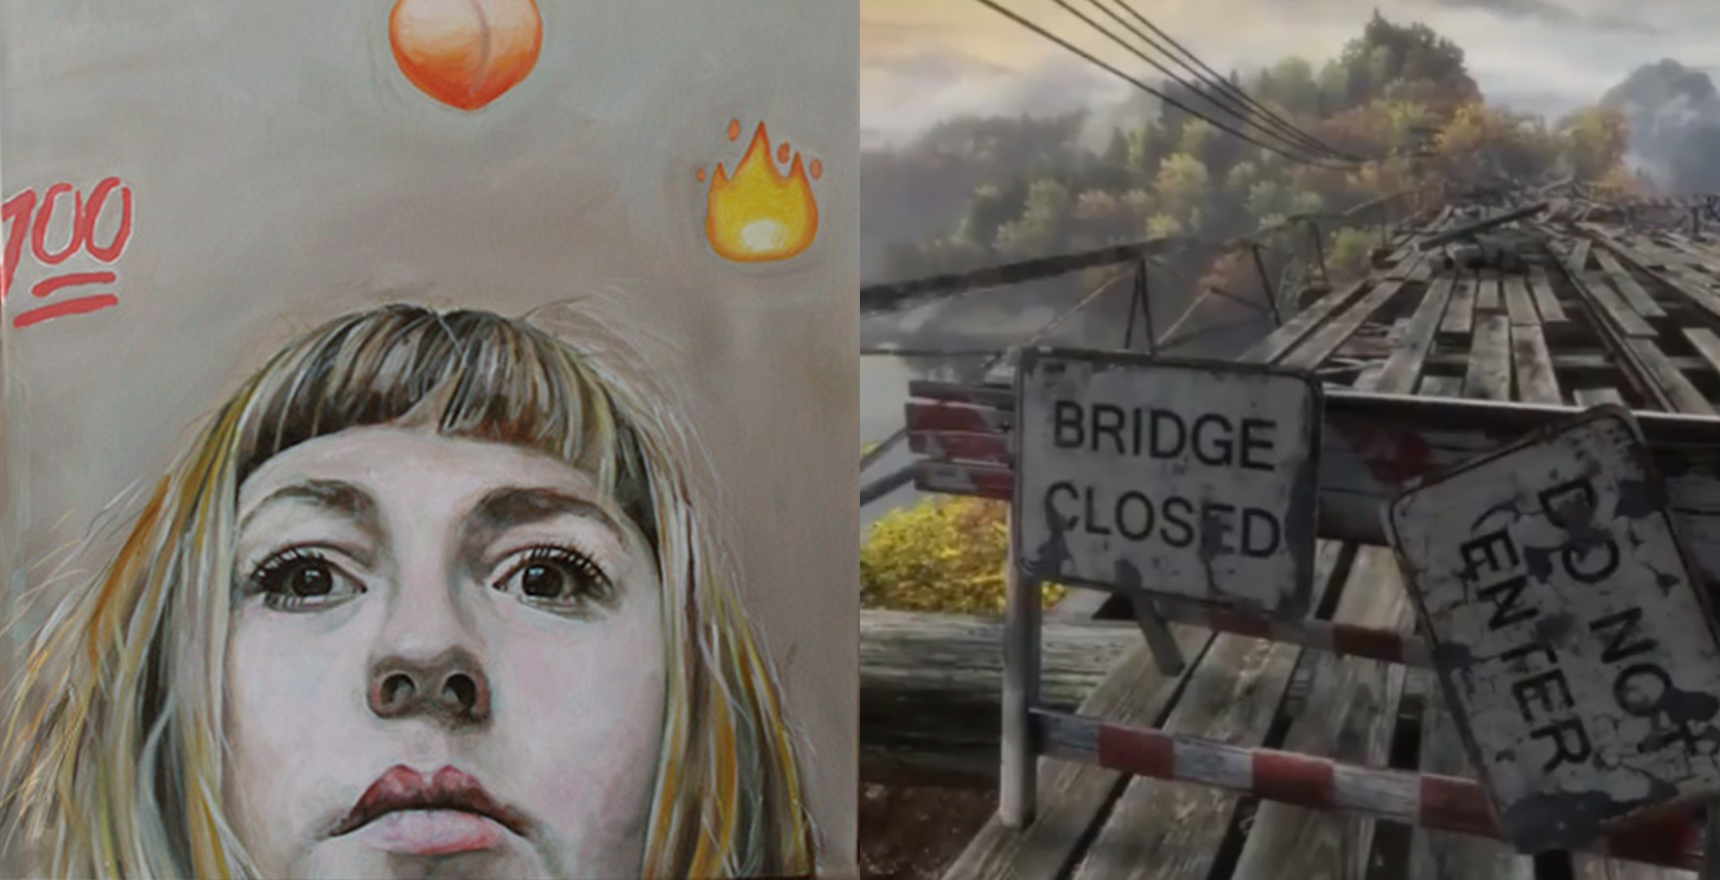 close up drawing of a woman's face opposite a drawing of a dilapidated bridge